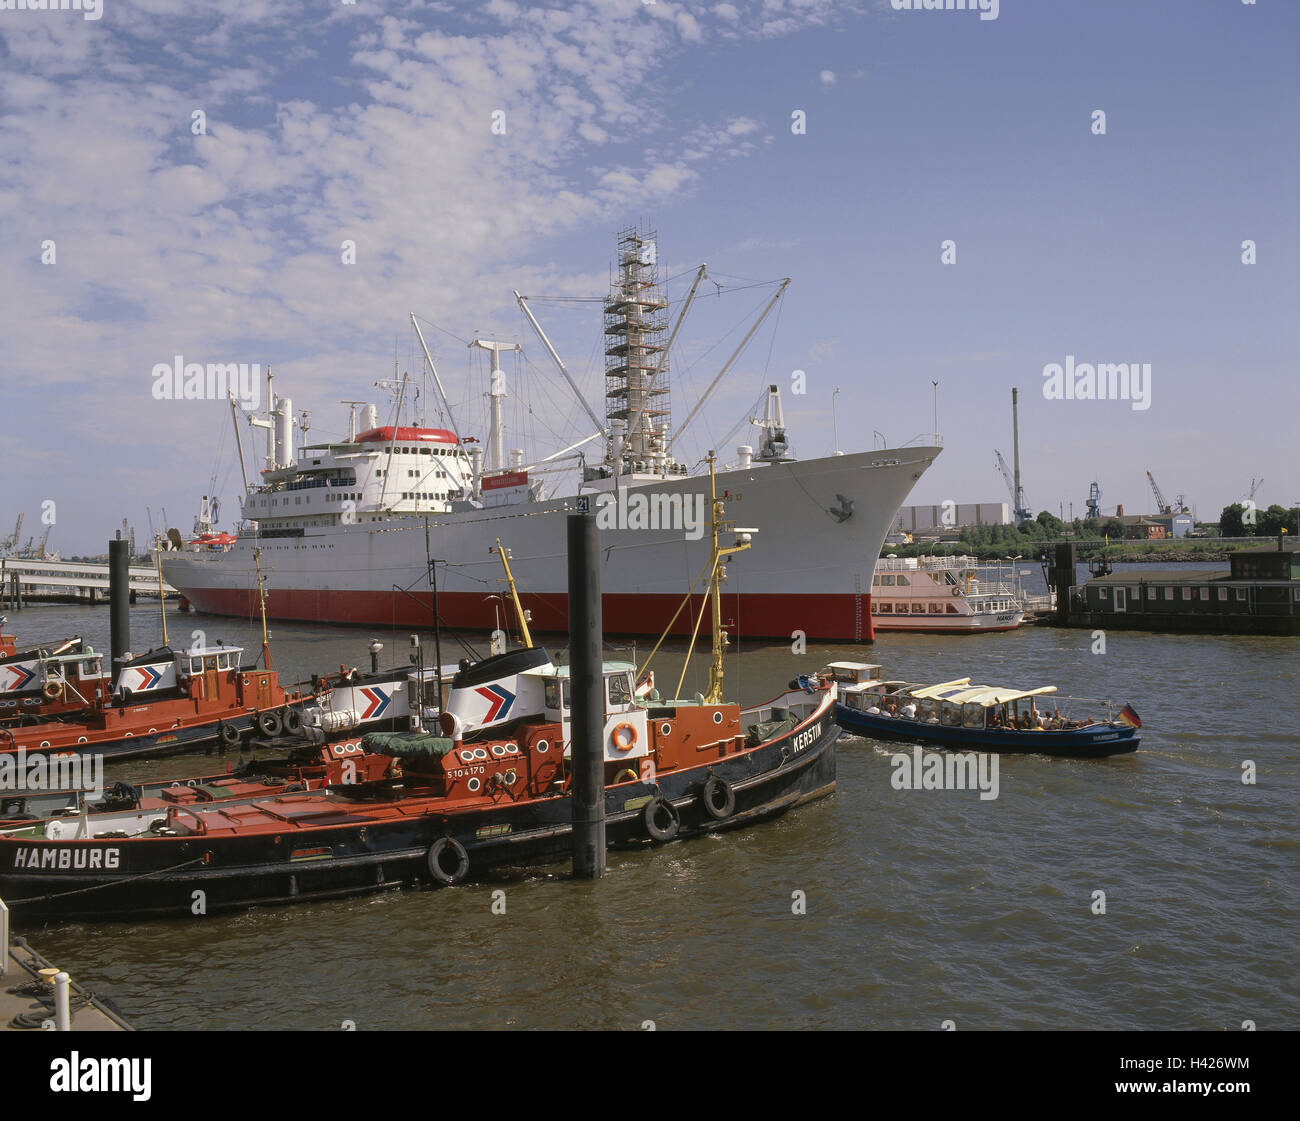 Germany, Hamburg, harbour, ship 'Cap San Diego', Europe, Hanseatic town, Saint Pauli, landing stages, the Elbe, museum ship, ship, label, stroke, ship name, general cargo freighter, restores, navigation, place of interest Stock Photo